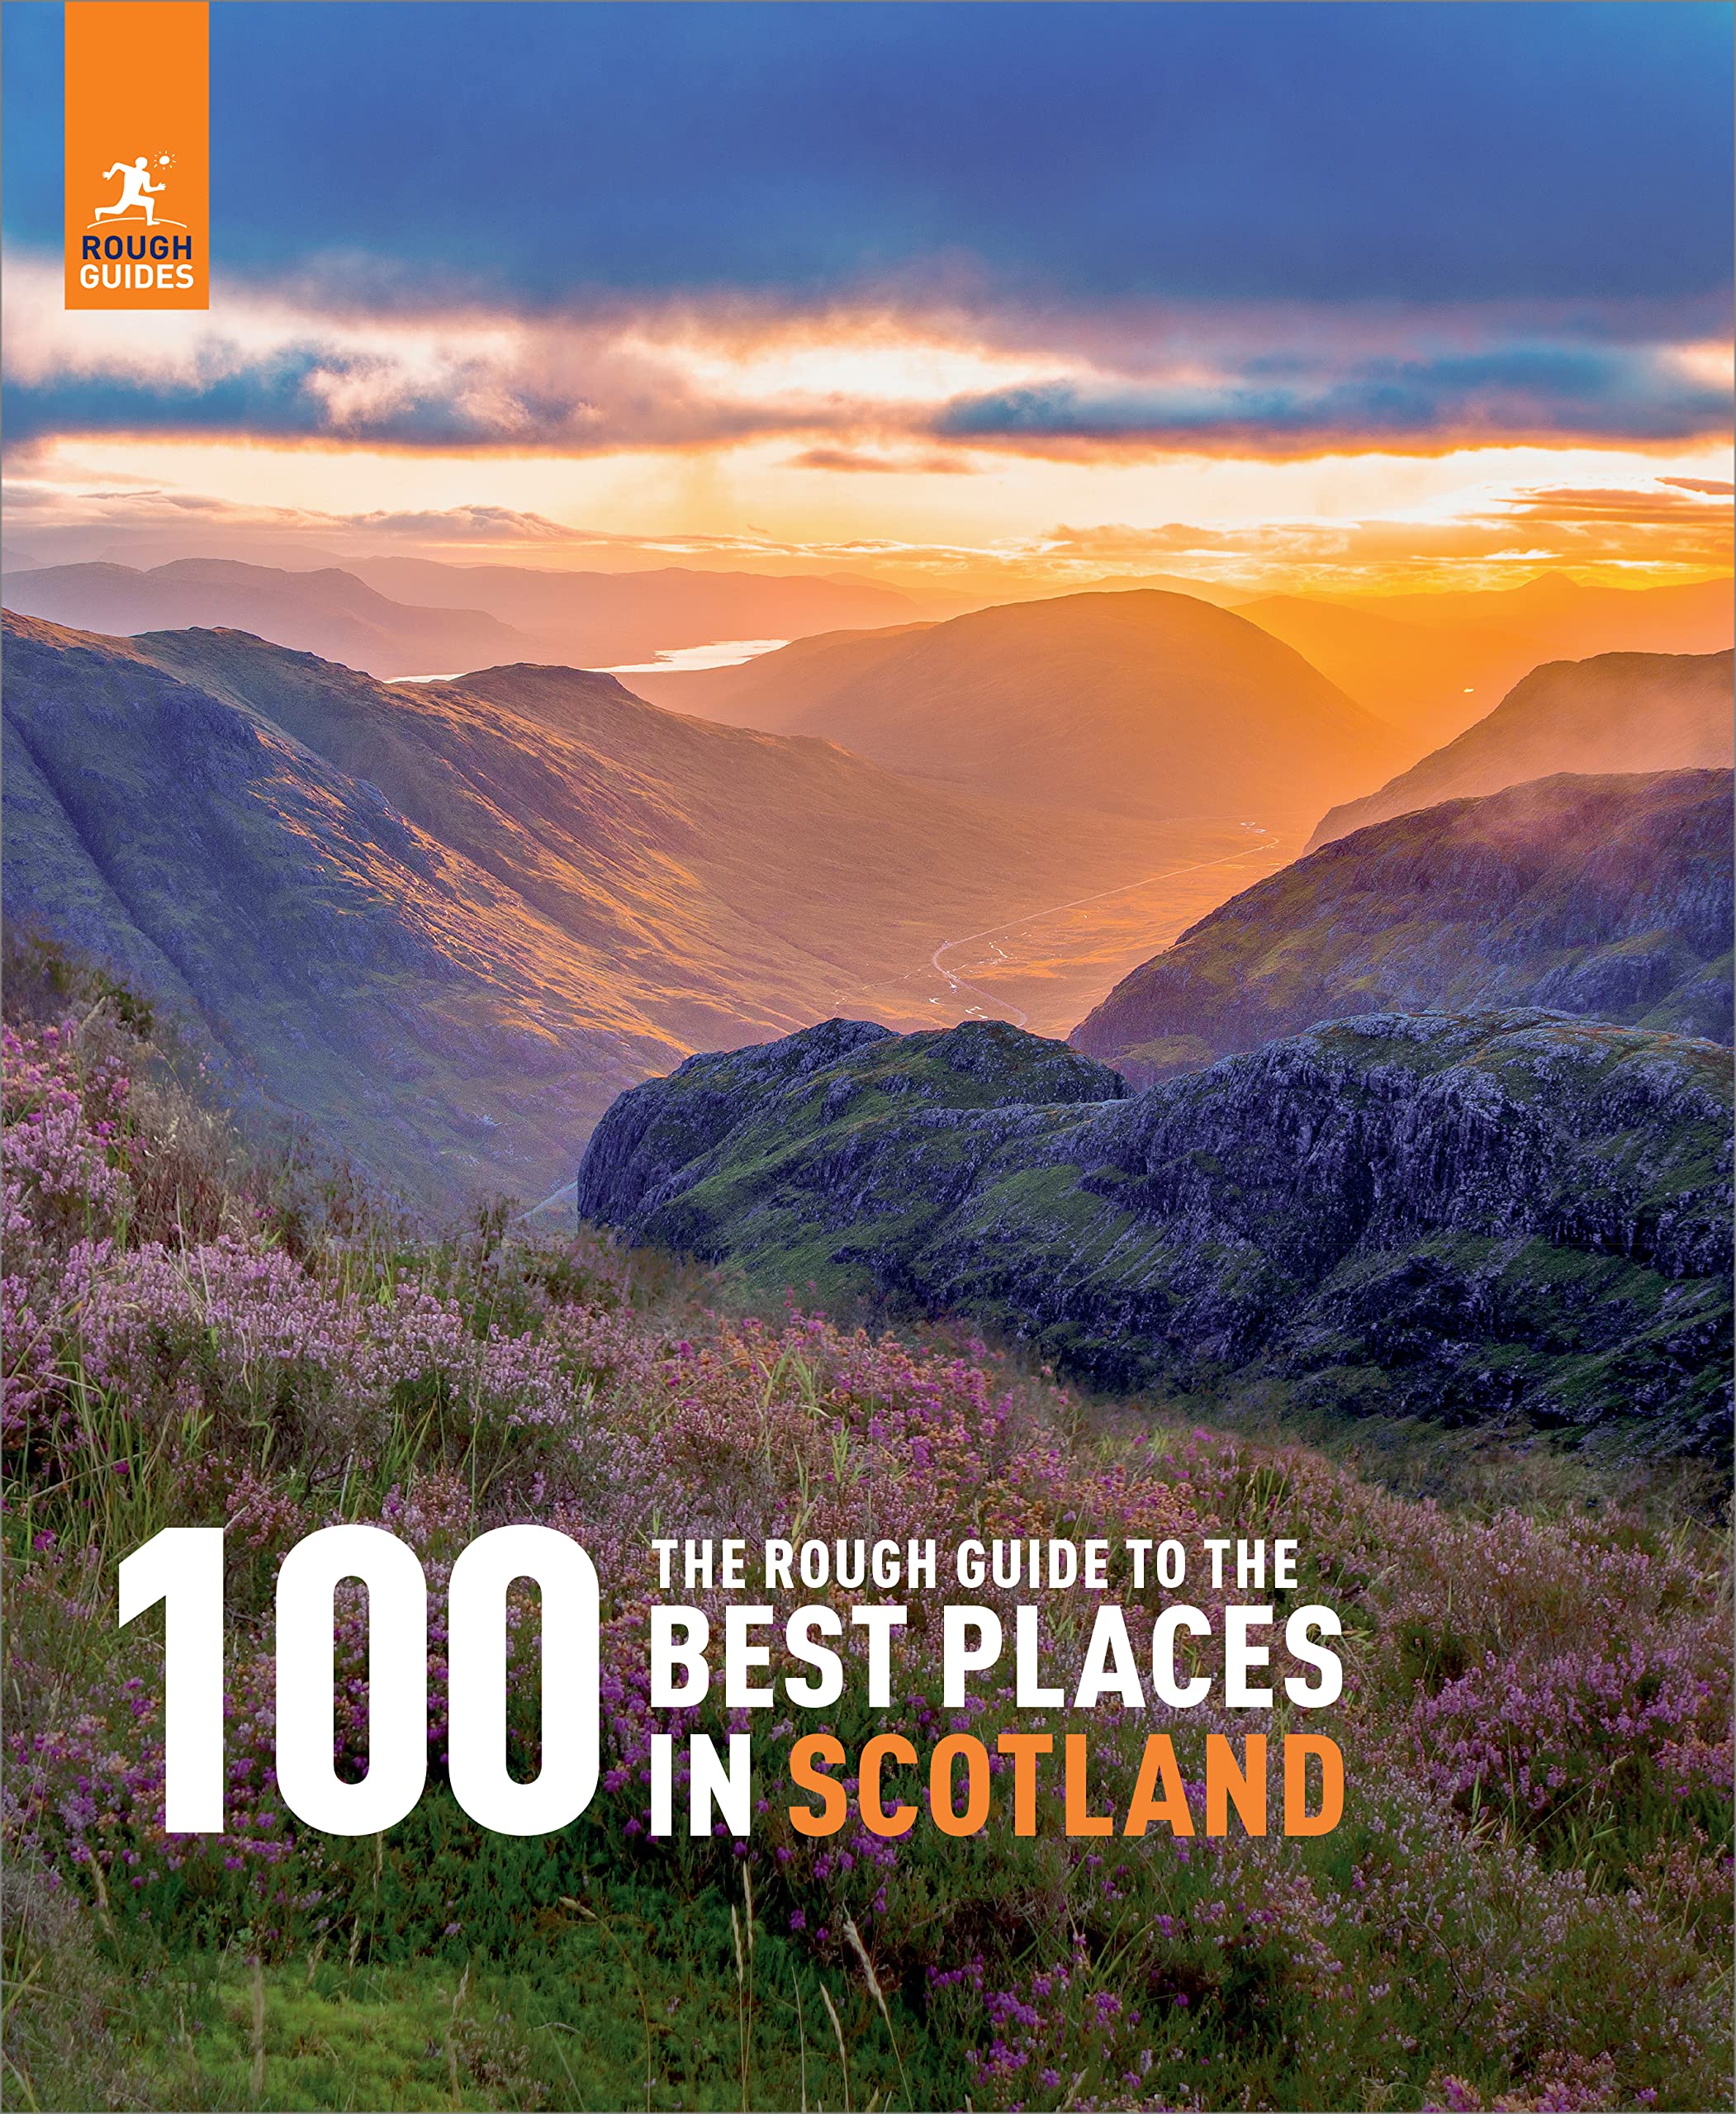 Online bestellen: Reisgids The Rough Guide to the 100 Best Places in Scotland - Schotland | Rough Guides